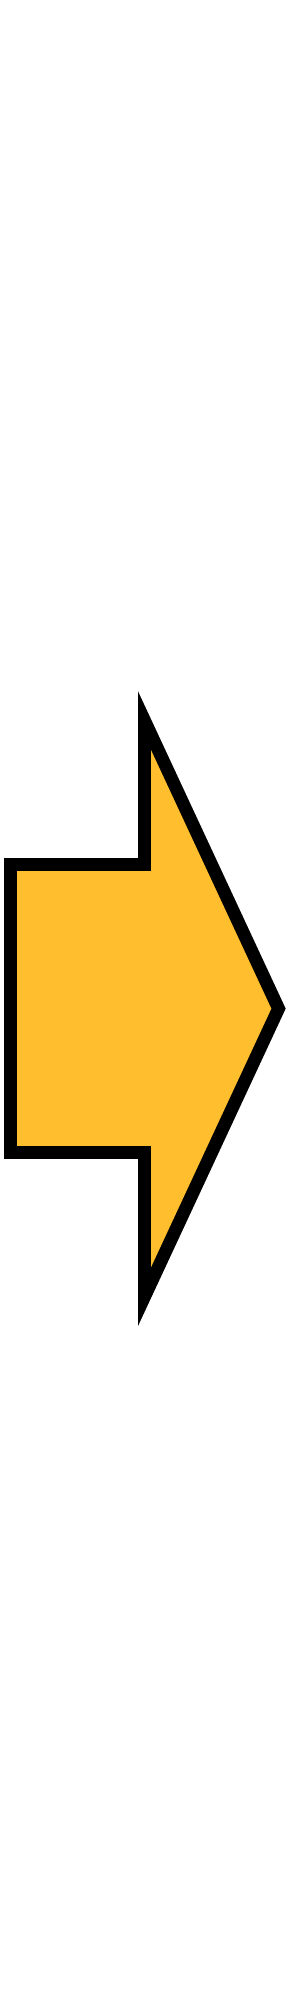 This yellow arrow pointing to the right indicates that if the core features in the column to the left are met, then the action items in the column to the right are suggested.